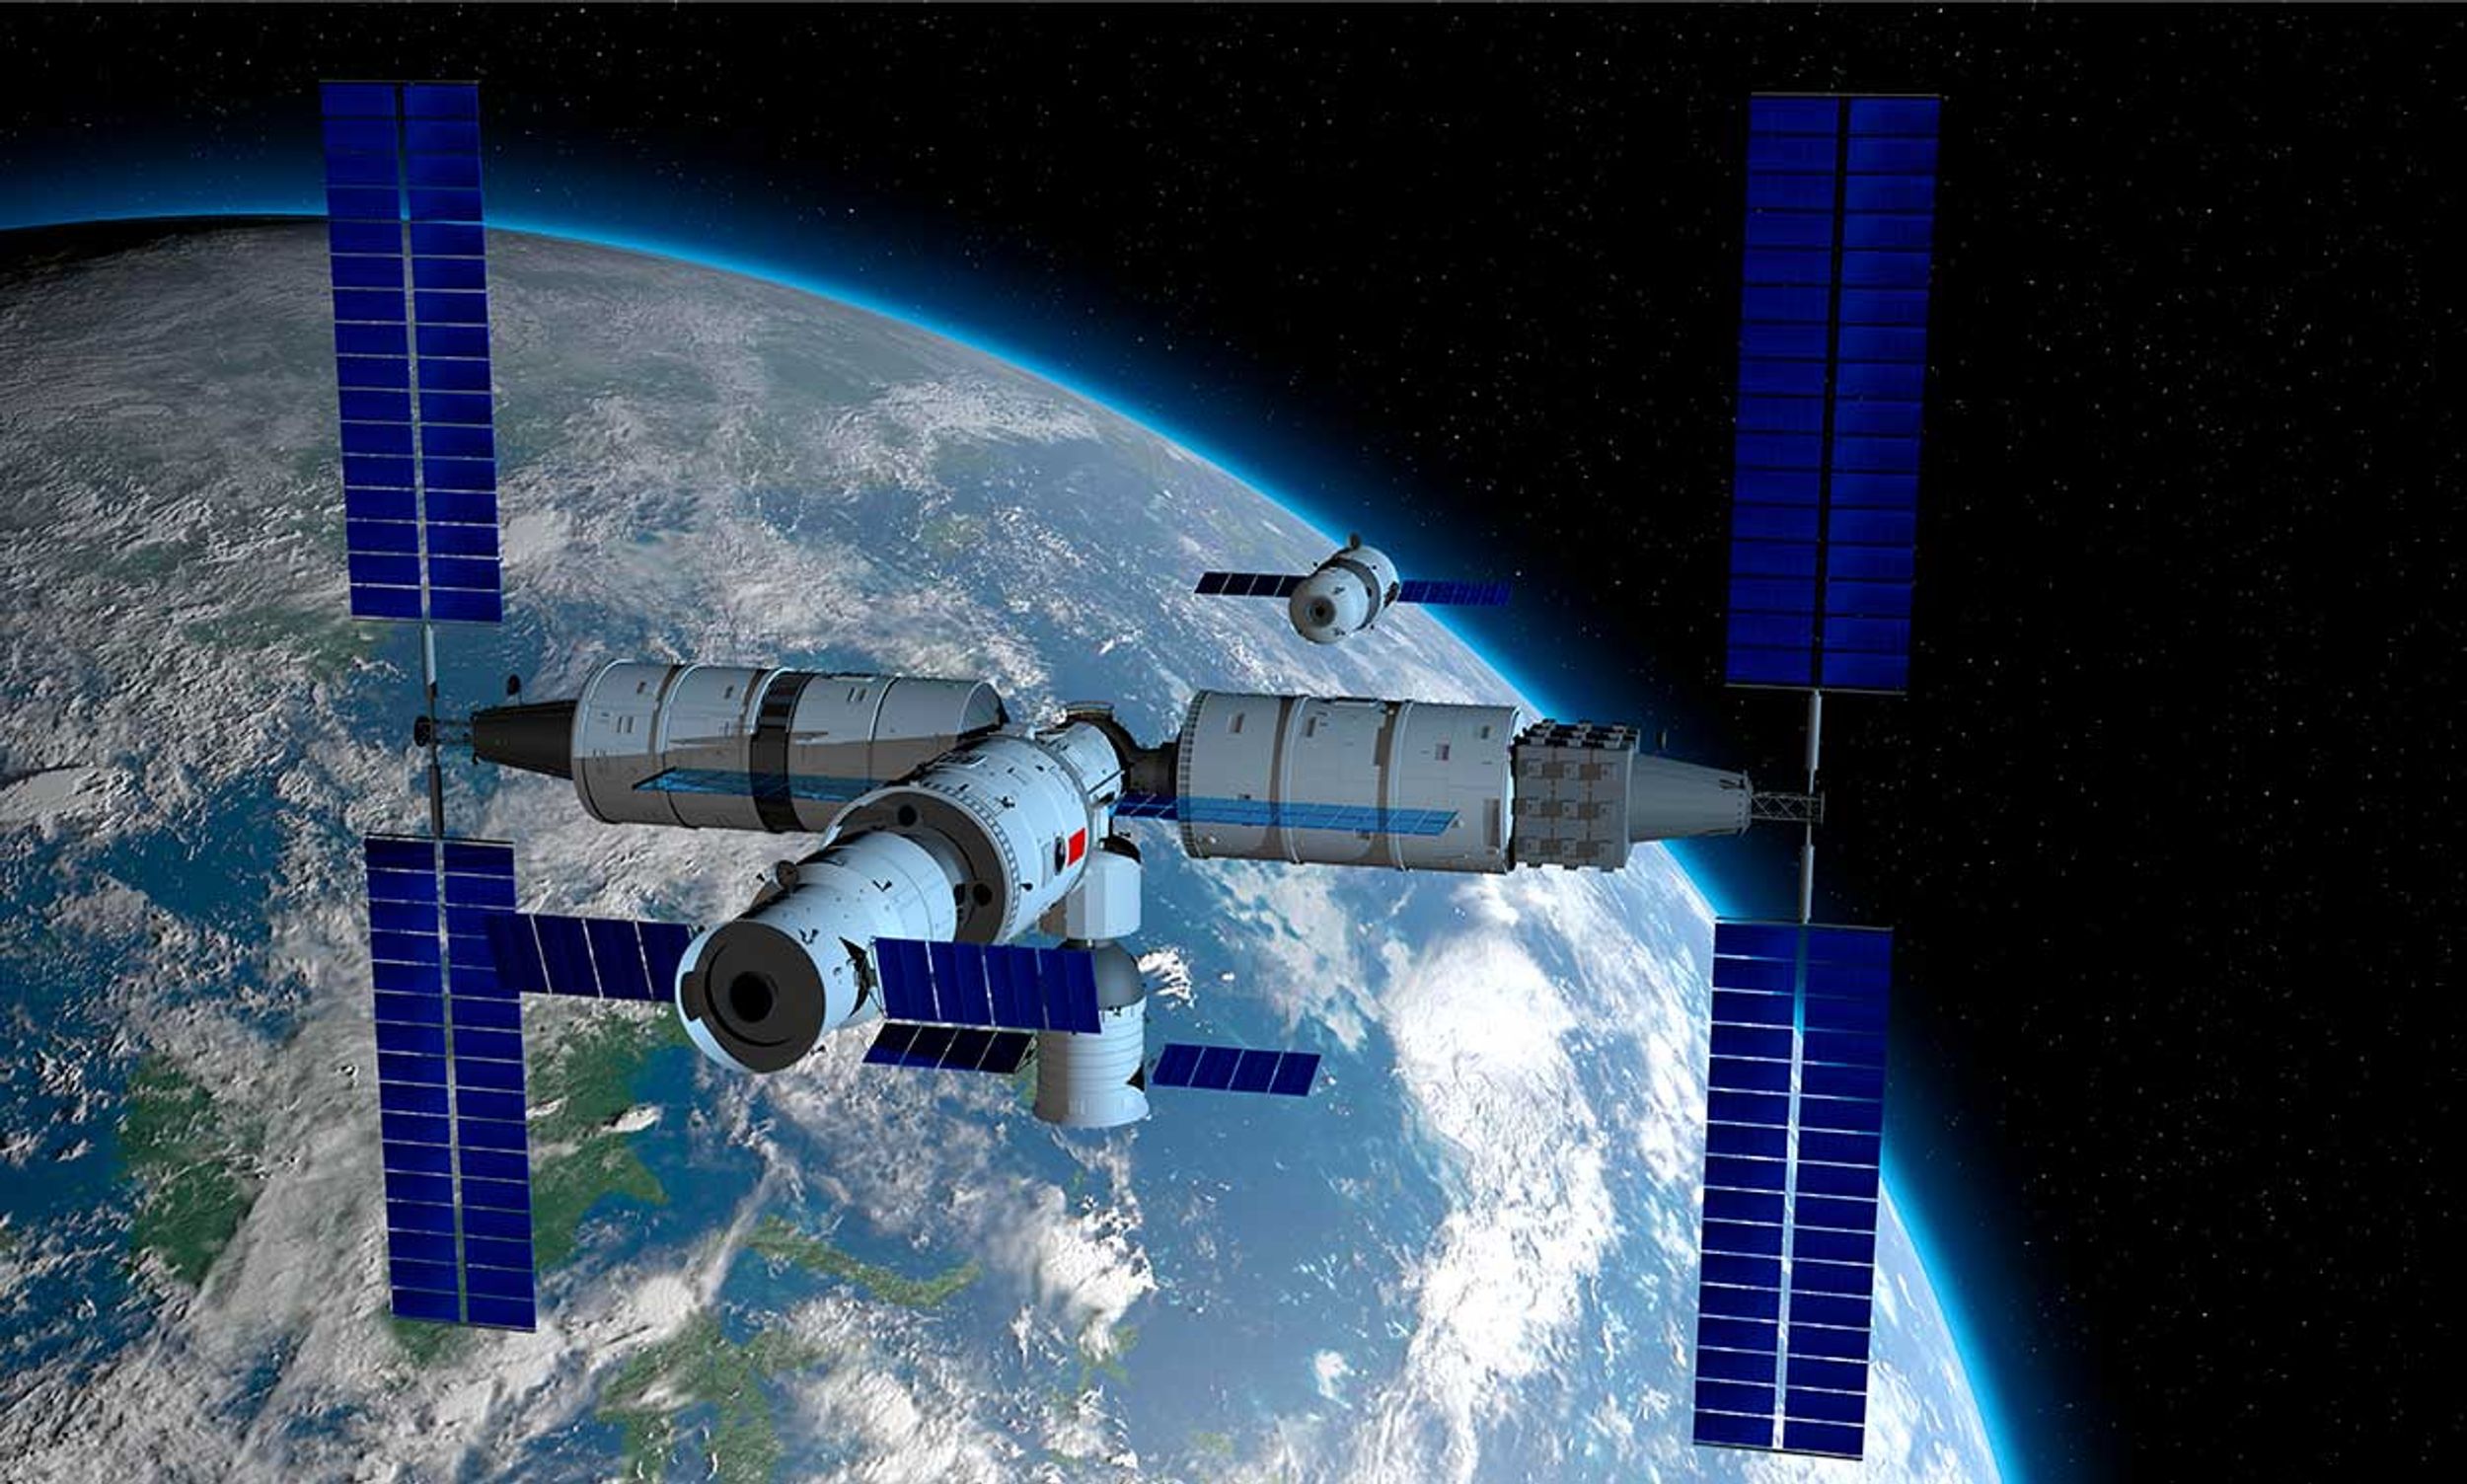 Illustration conceptualizing Shenzhou manned space vessel in the direction of coupling to the TIANHE core module in TIANGONG 3 - Chinese space station with the planet Earth behind